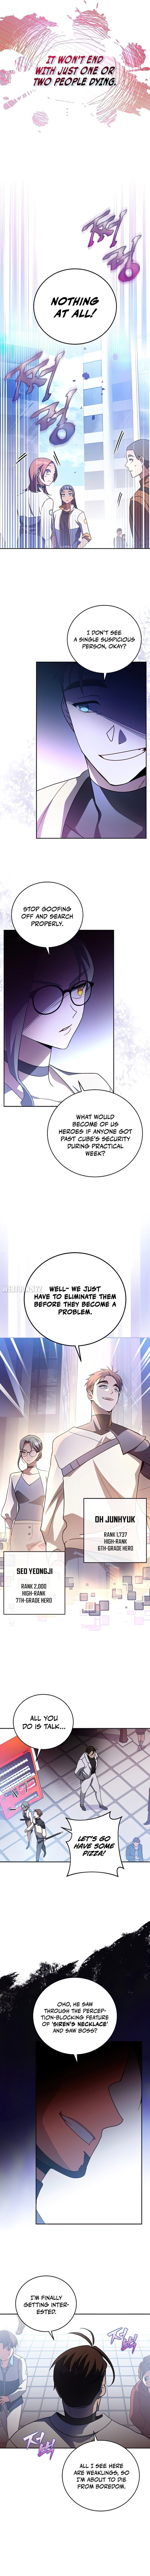 the-novels-extra-remake-chap-30-5